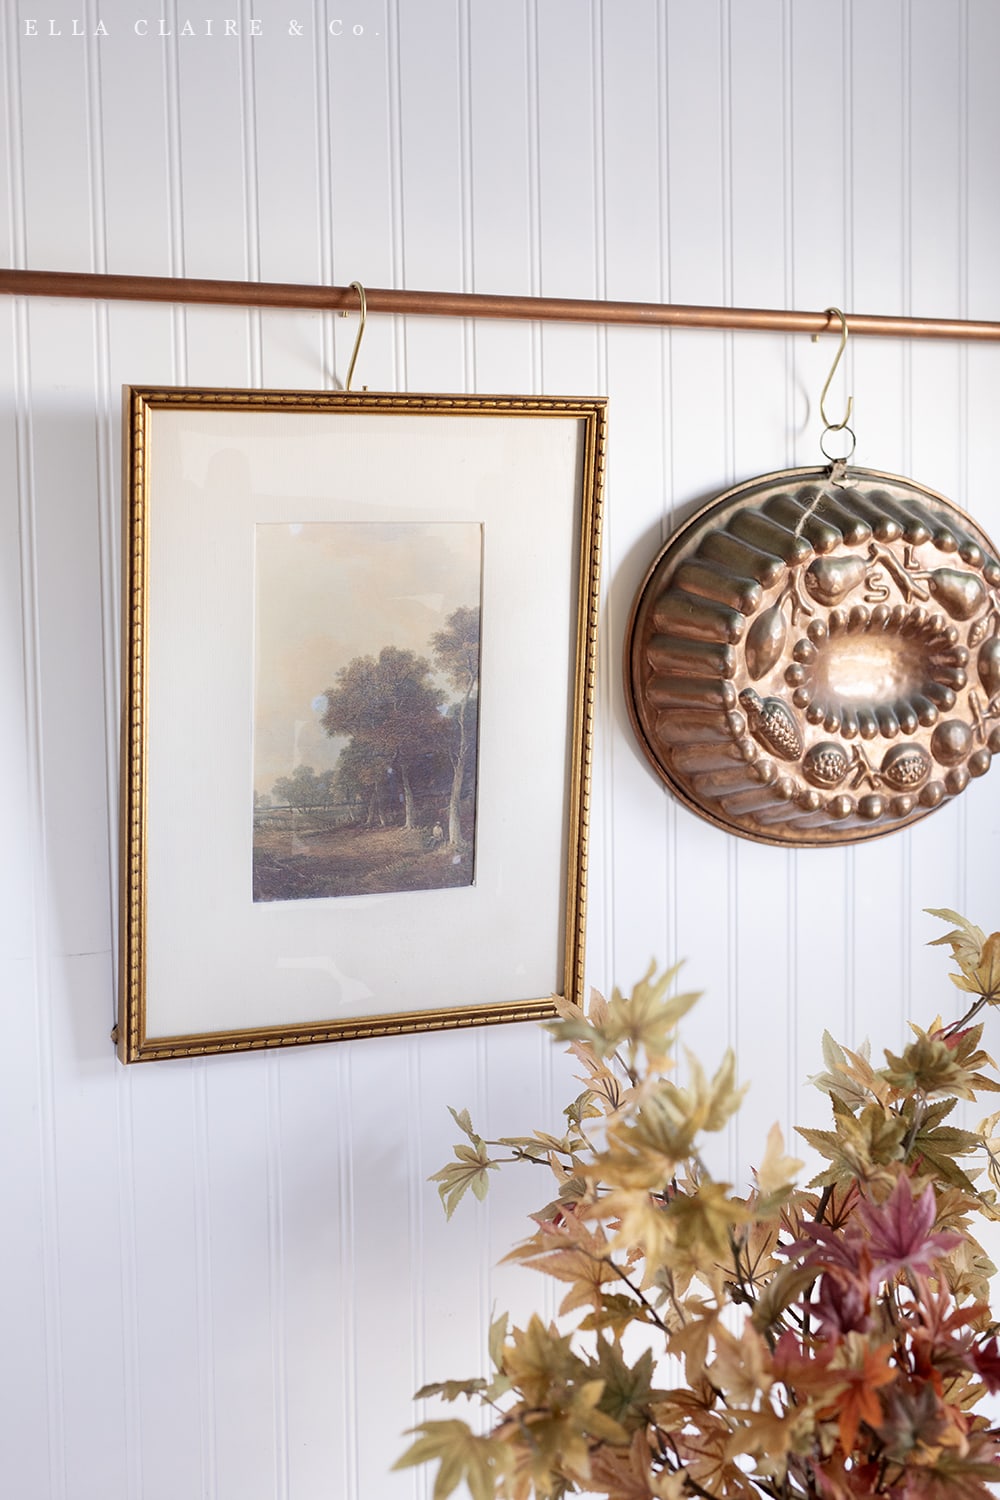 Printable fall trees in vintage frame hung on copper kitchen rod.